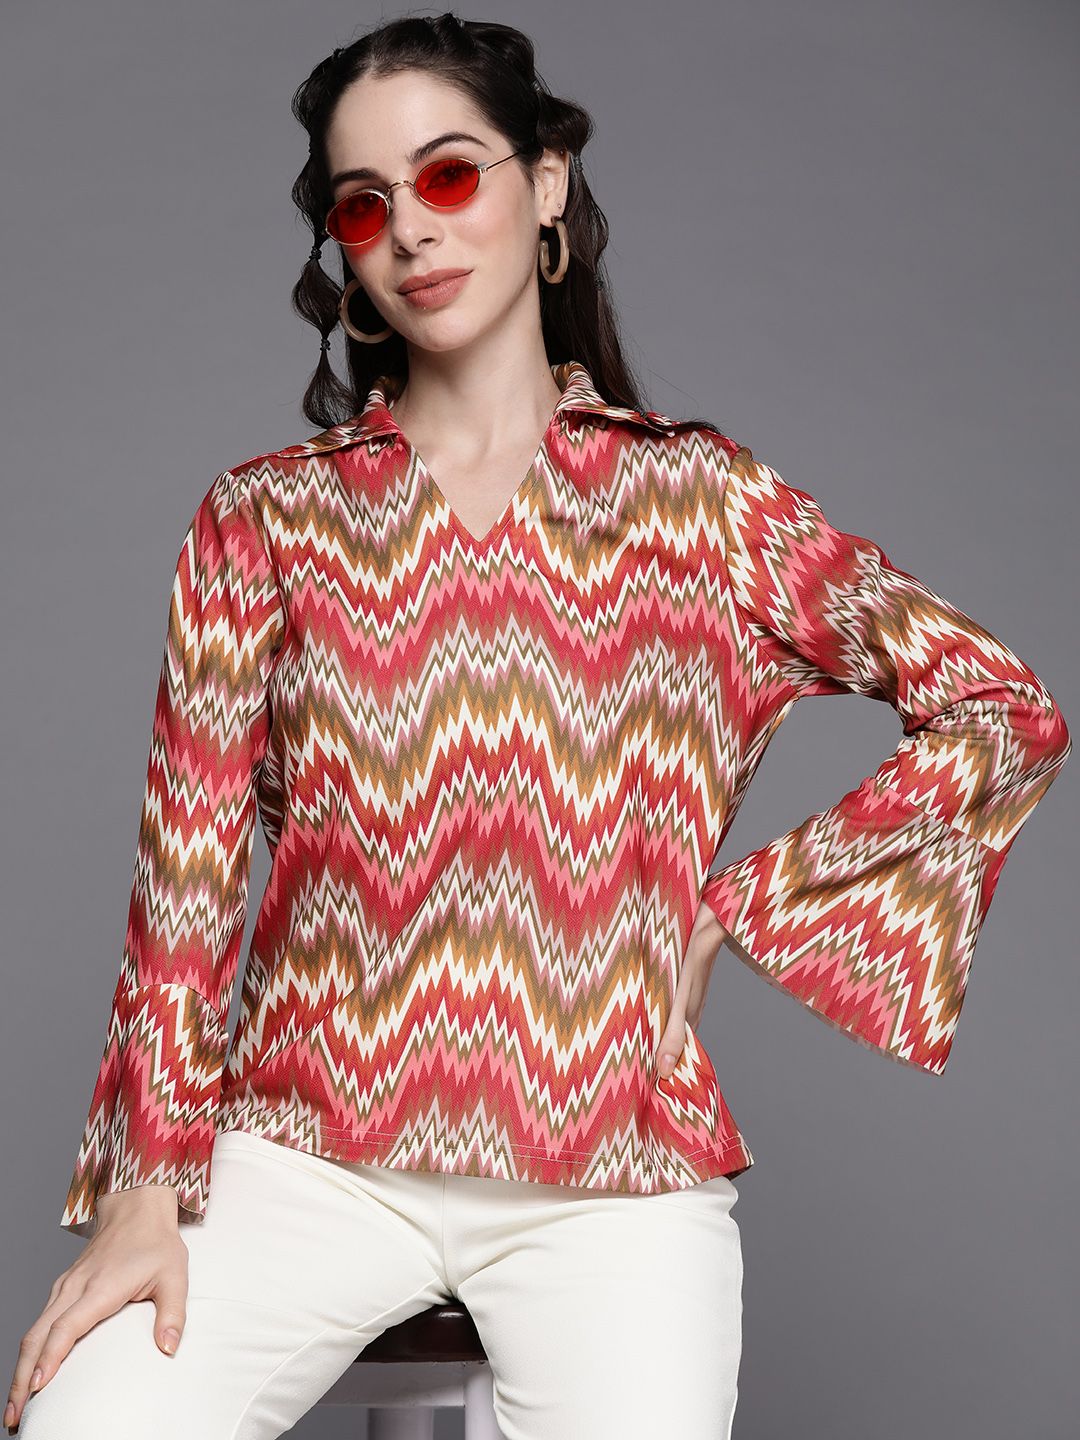 SASSAFRAS Red & White Chevron Printed Bell Sleeves Top Price in India